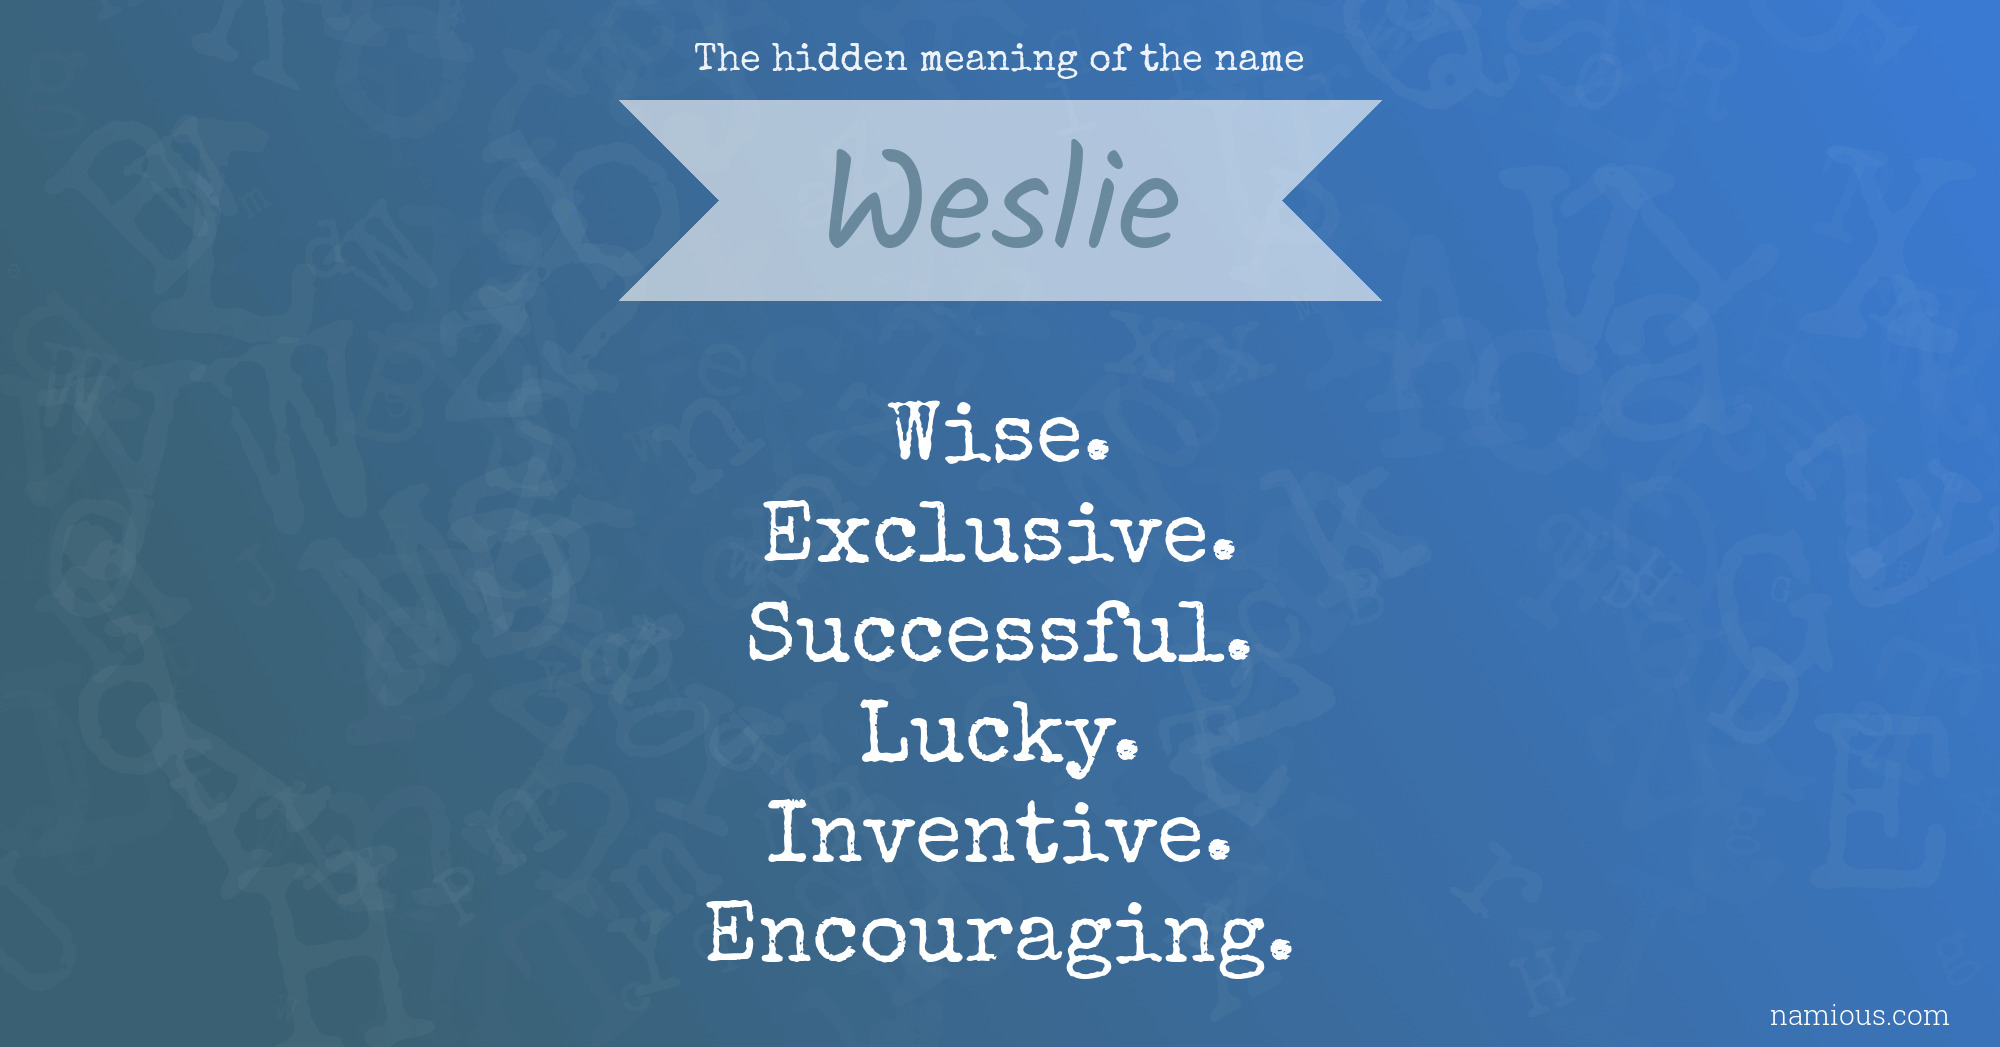 The hidden meaning of the name Weslie